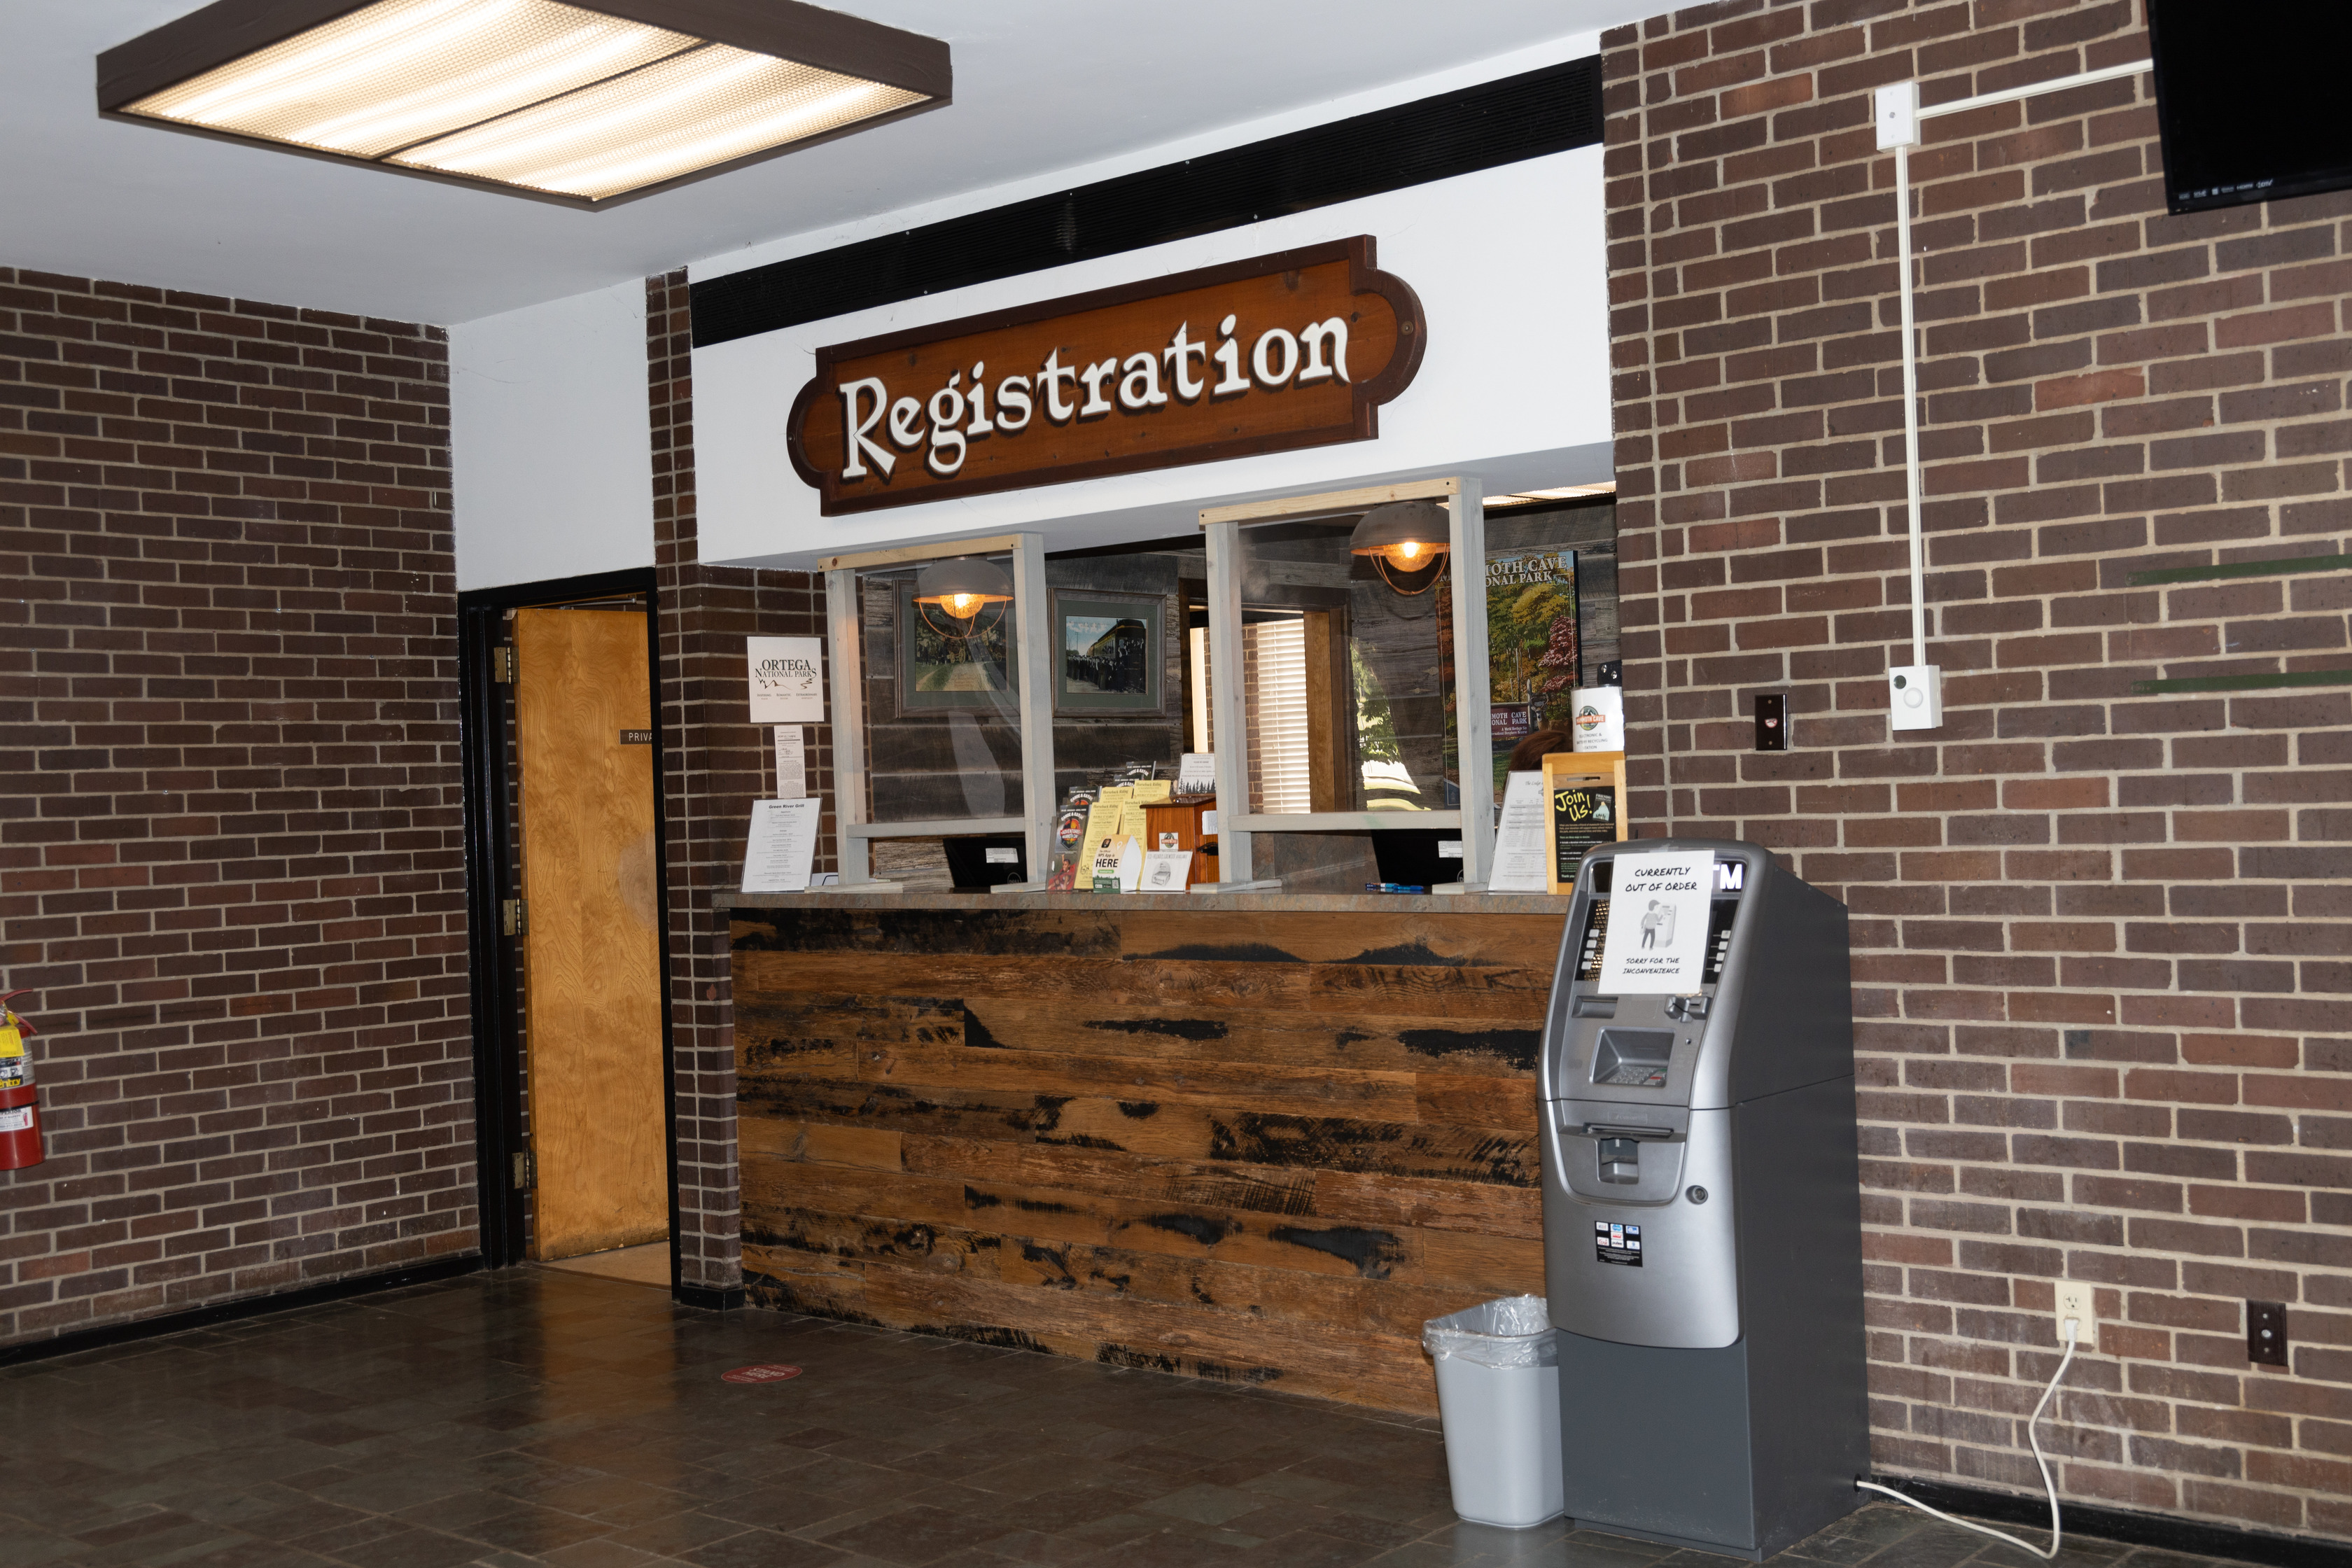 A sign reads "Registration" above a wooden desk area surrounded by brick walls. 